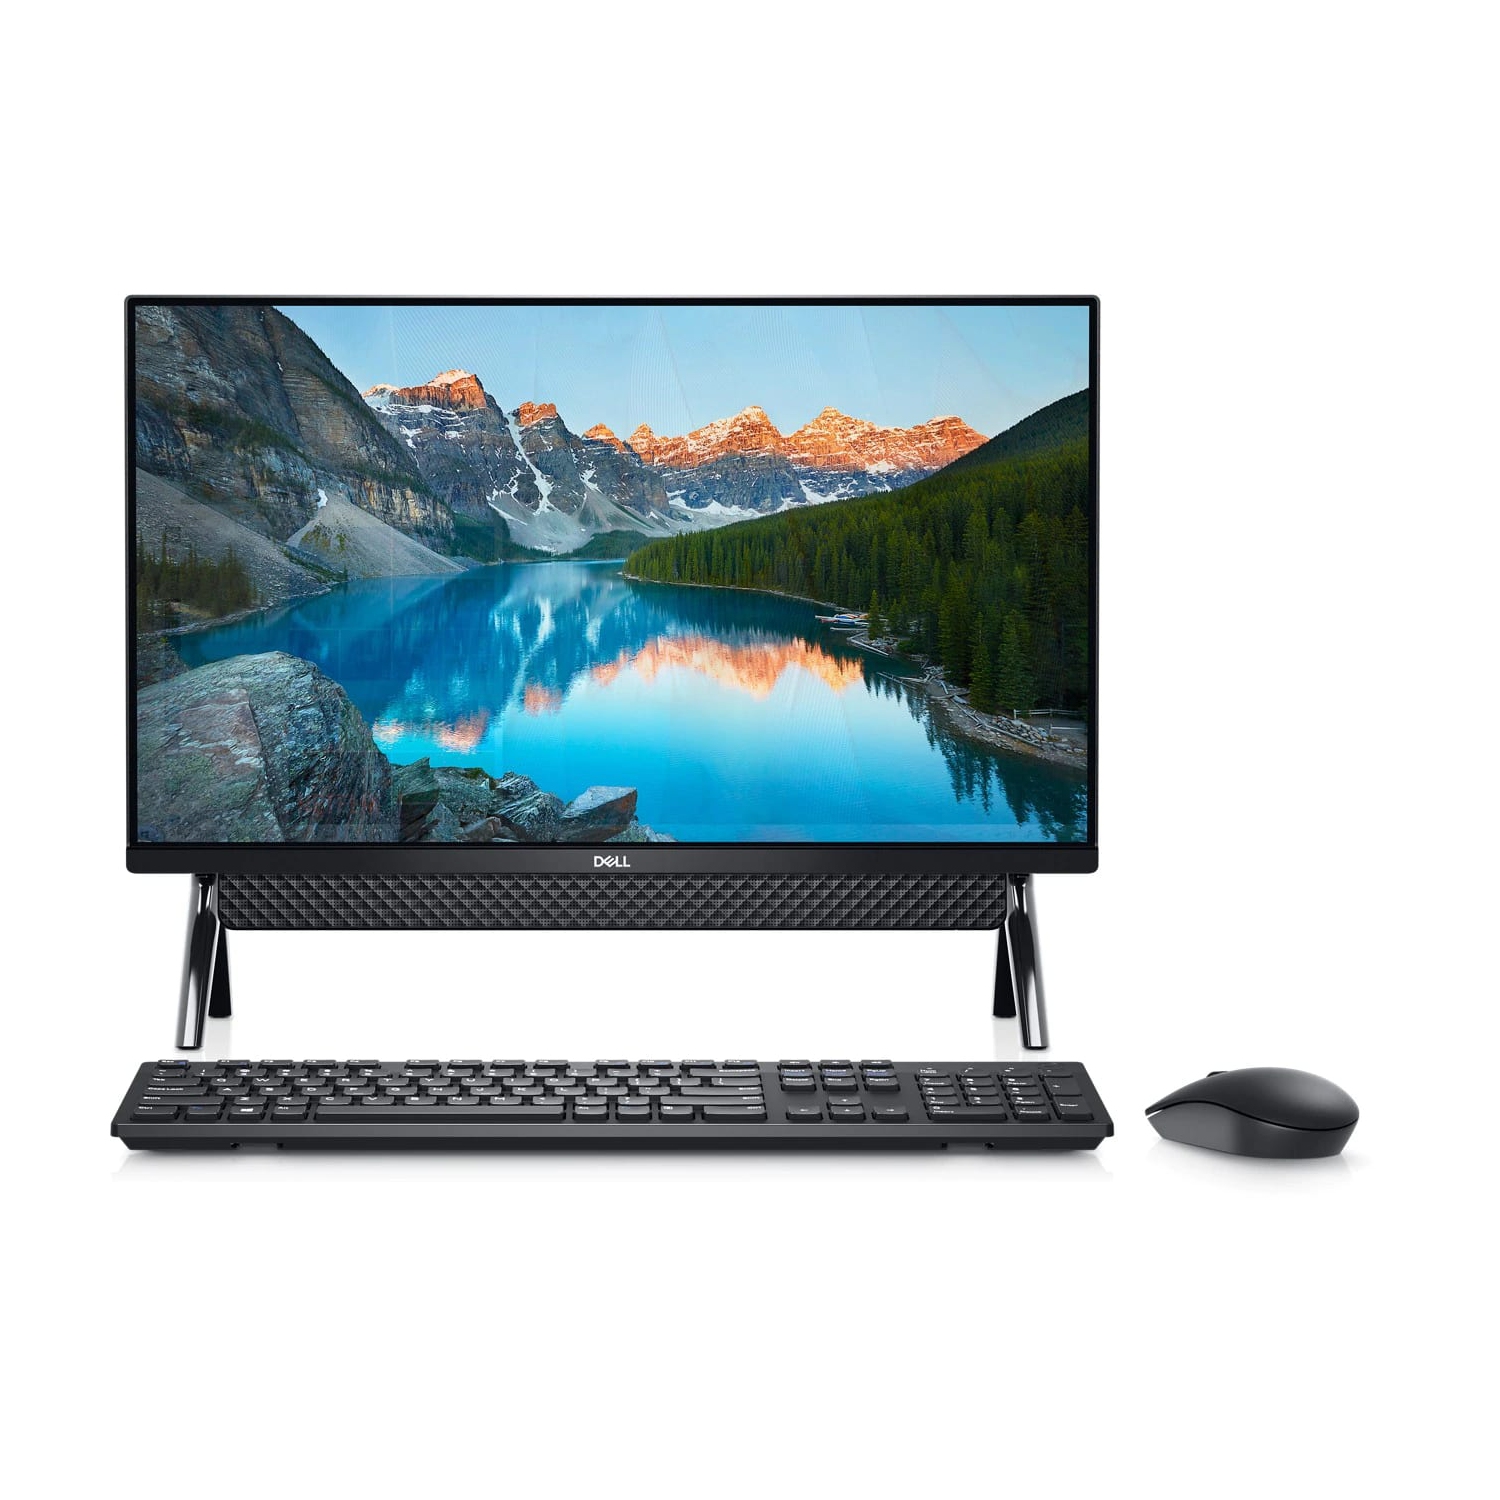 Refurbished (Excellent) - Dell Inspiron 24 5400 AIO (2020) | 24" FHD | Core i5 - 1TB HDD + 256GB SSD - 12GB RAM | 4 Cores @ 4.2 GHz - 11th Gen CPU Certified Refurbished